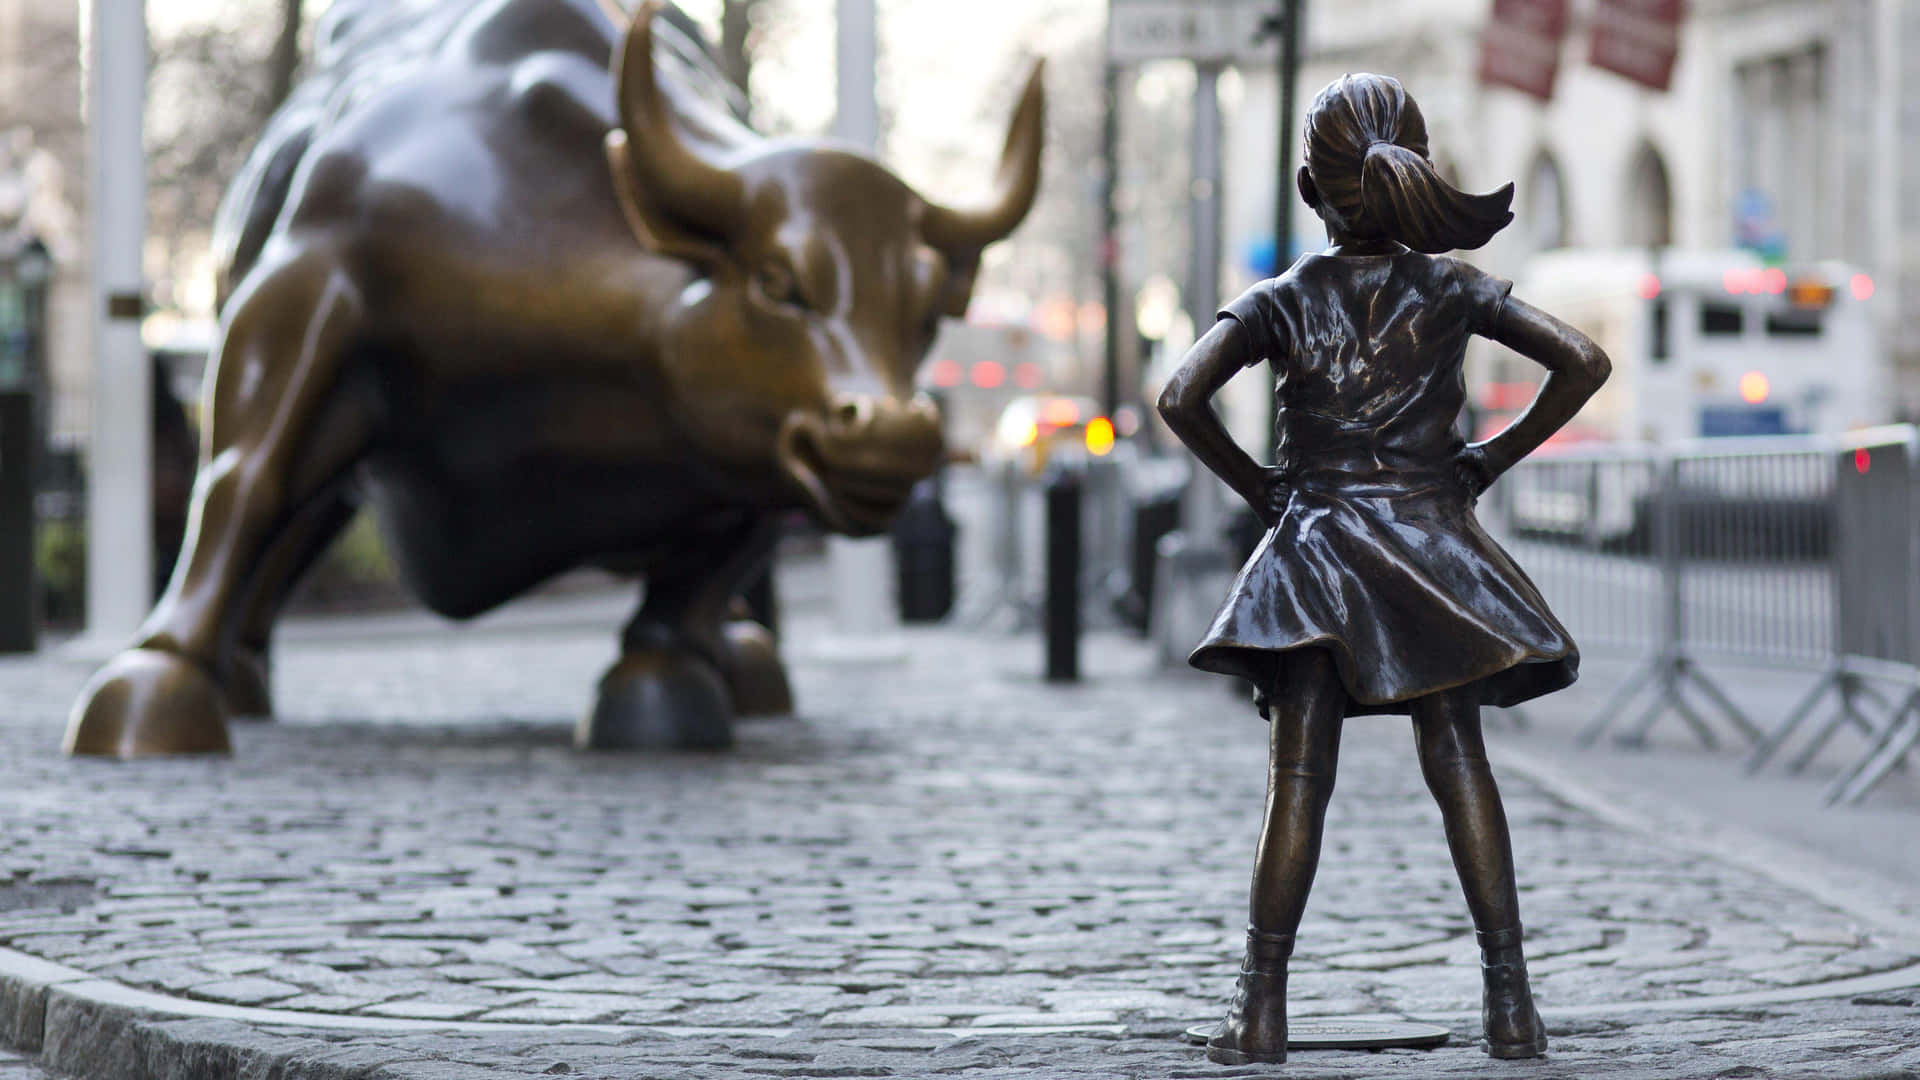 A Statue Of A Girl Standing Next To A Bull Wallpaper